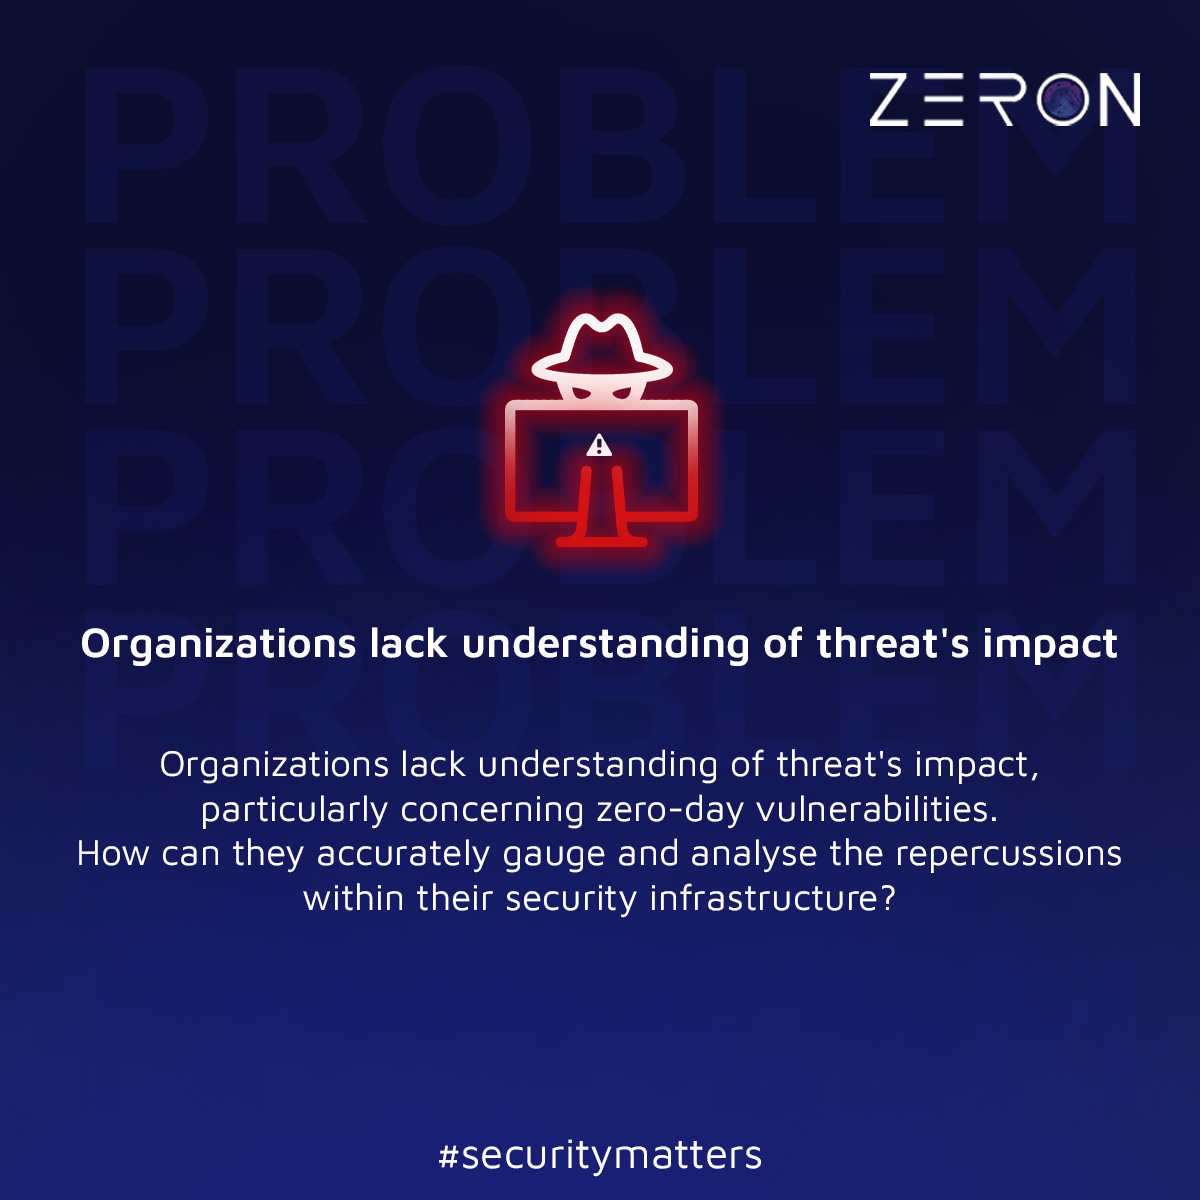 In today's digital landscape, understanding threat impacts is crucial for security. 
Stay tuned for Zeron's insights on effective strategies. 
#Zeron #Cybersecurity #CyberRisk #CyberRiskPosture #ThreatAnalysis #SecurityMatters